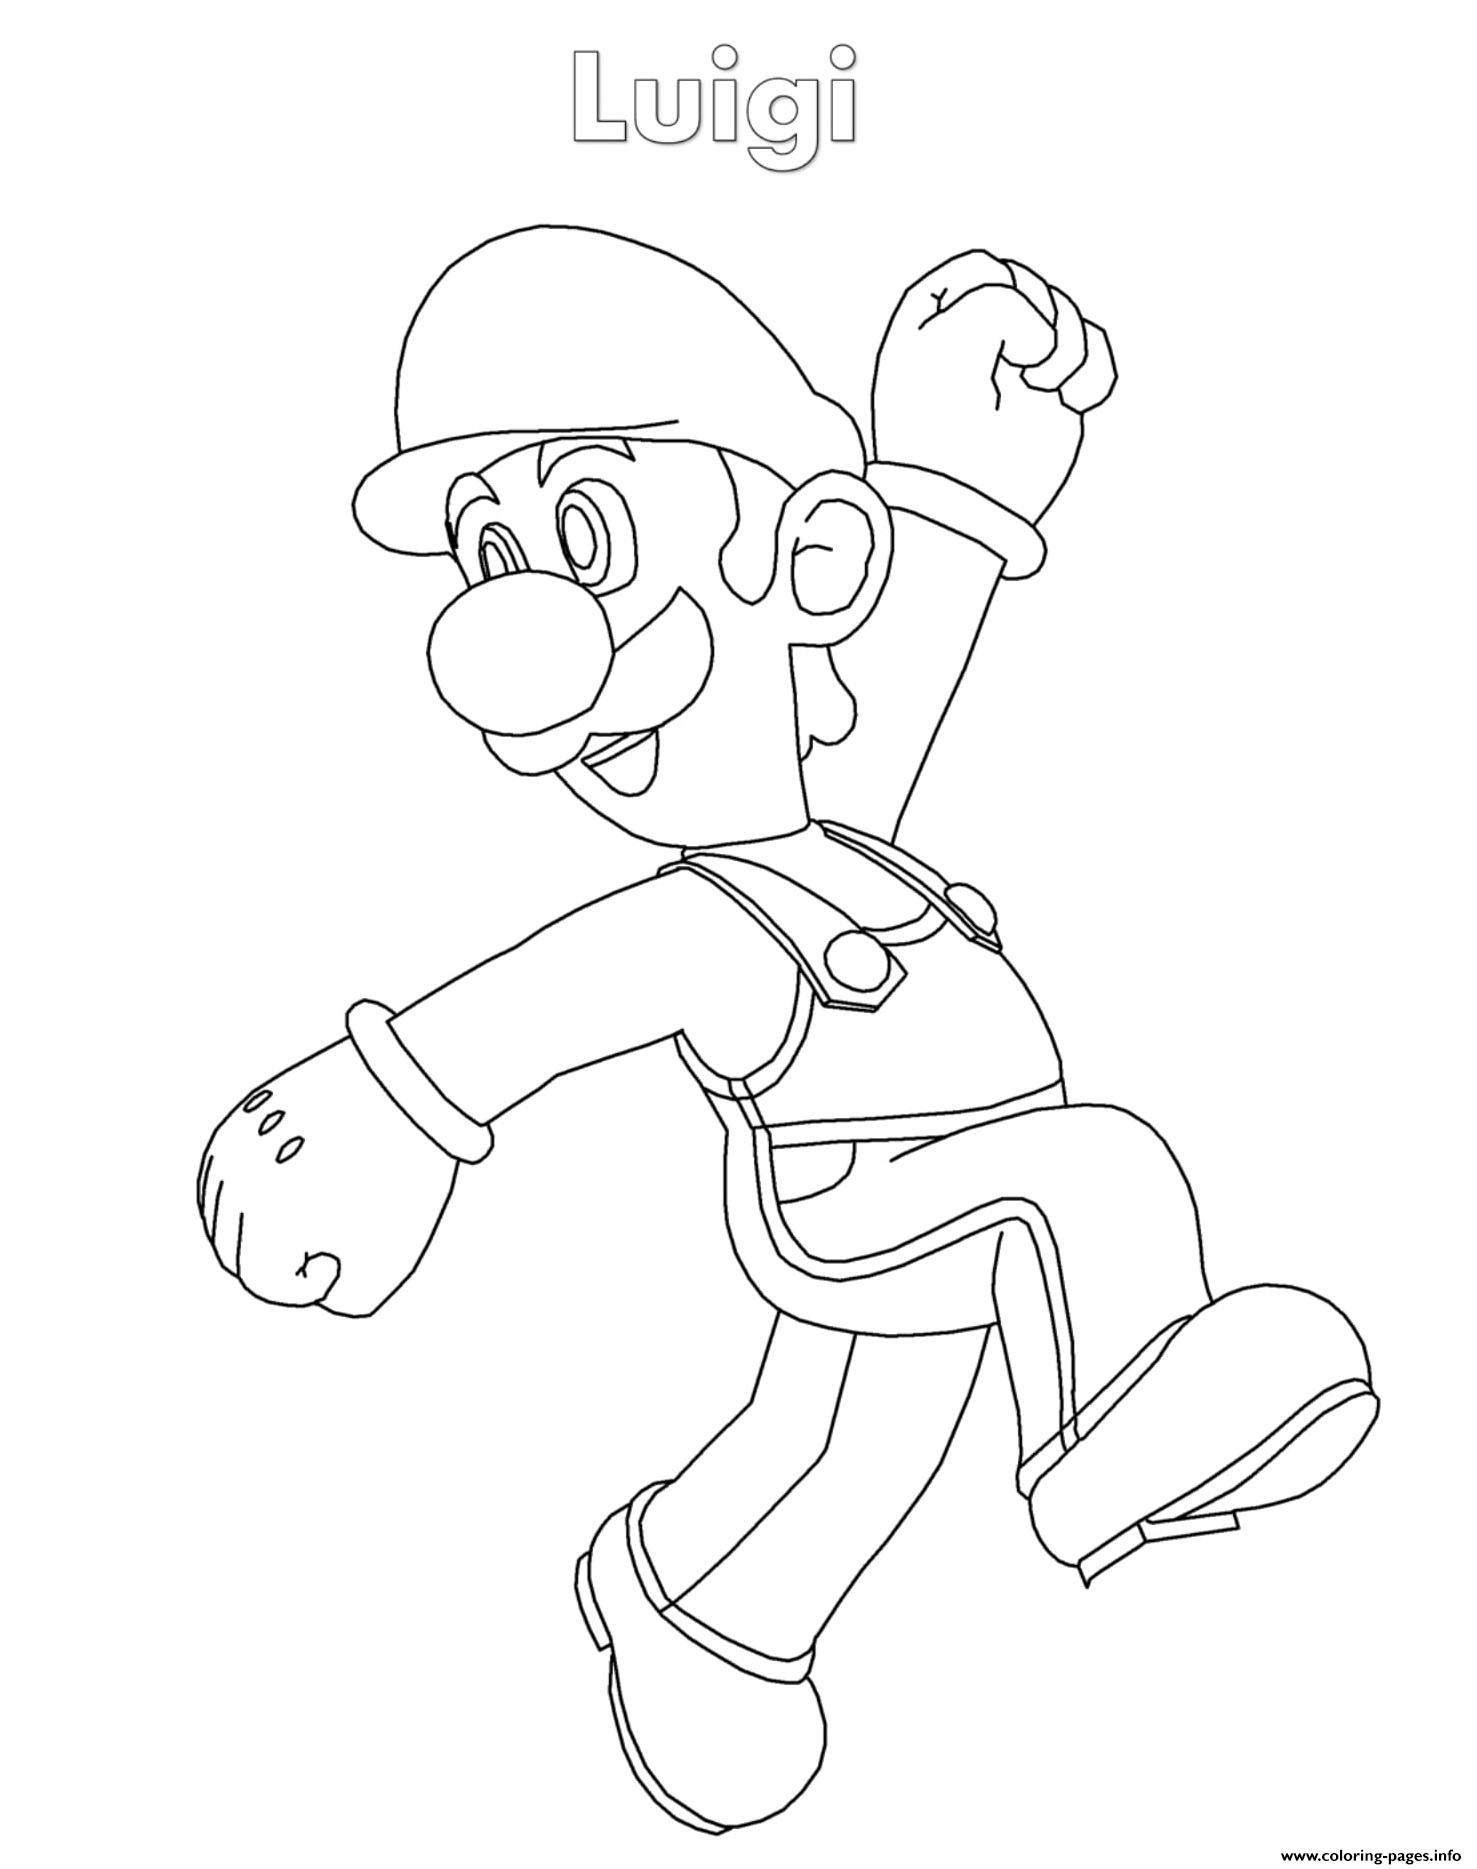 Luigi's Mansion Coloring Pages - Coloring Home